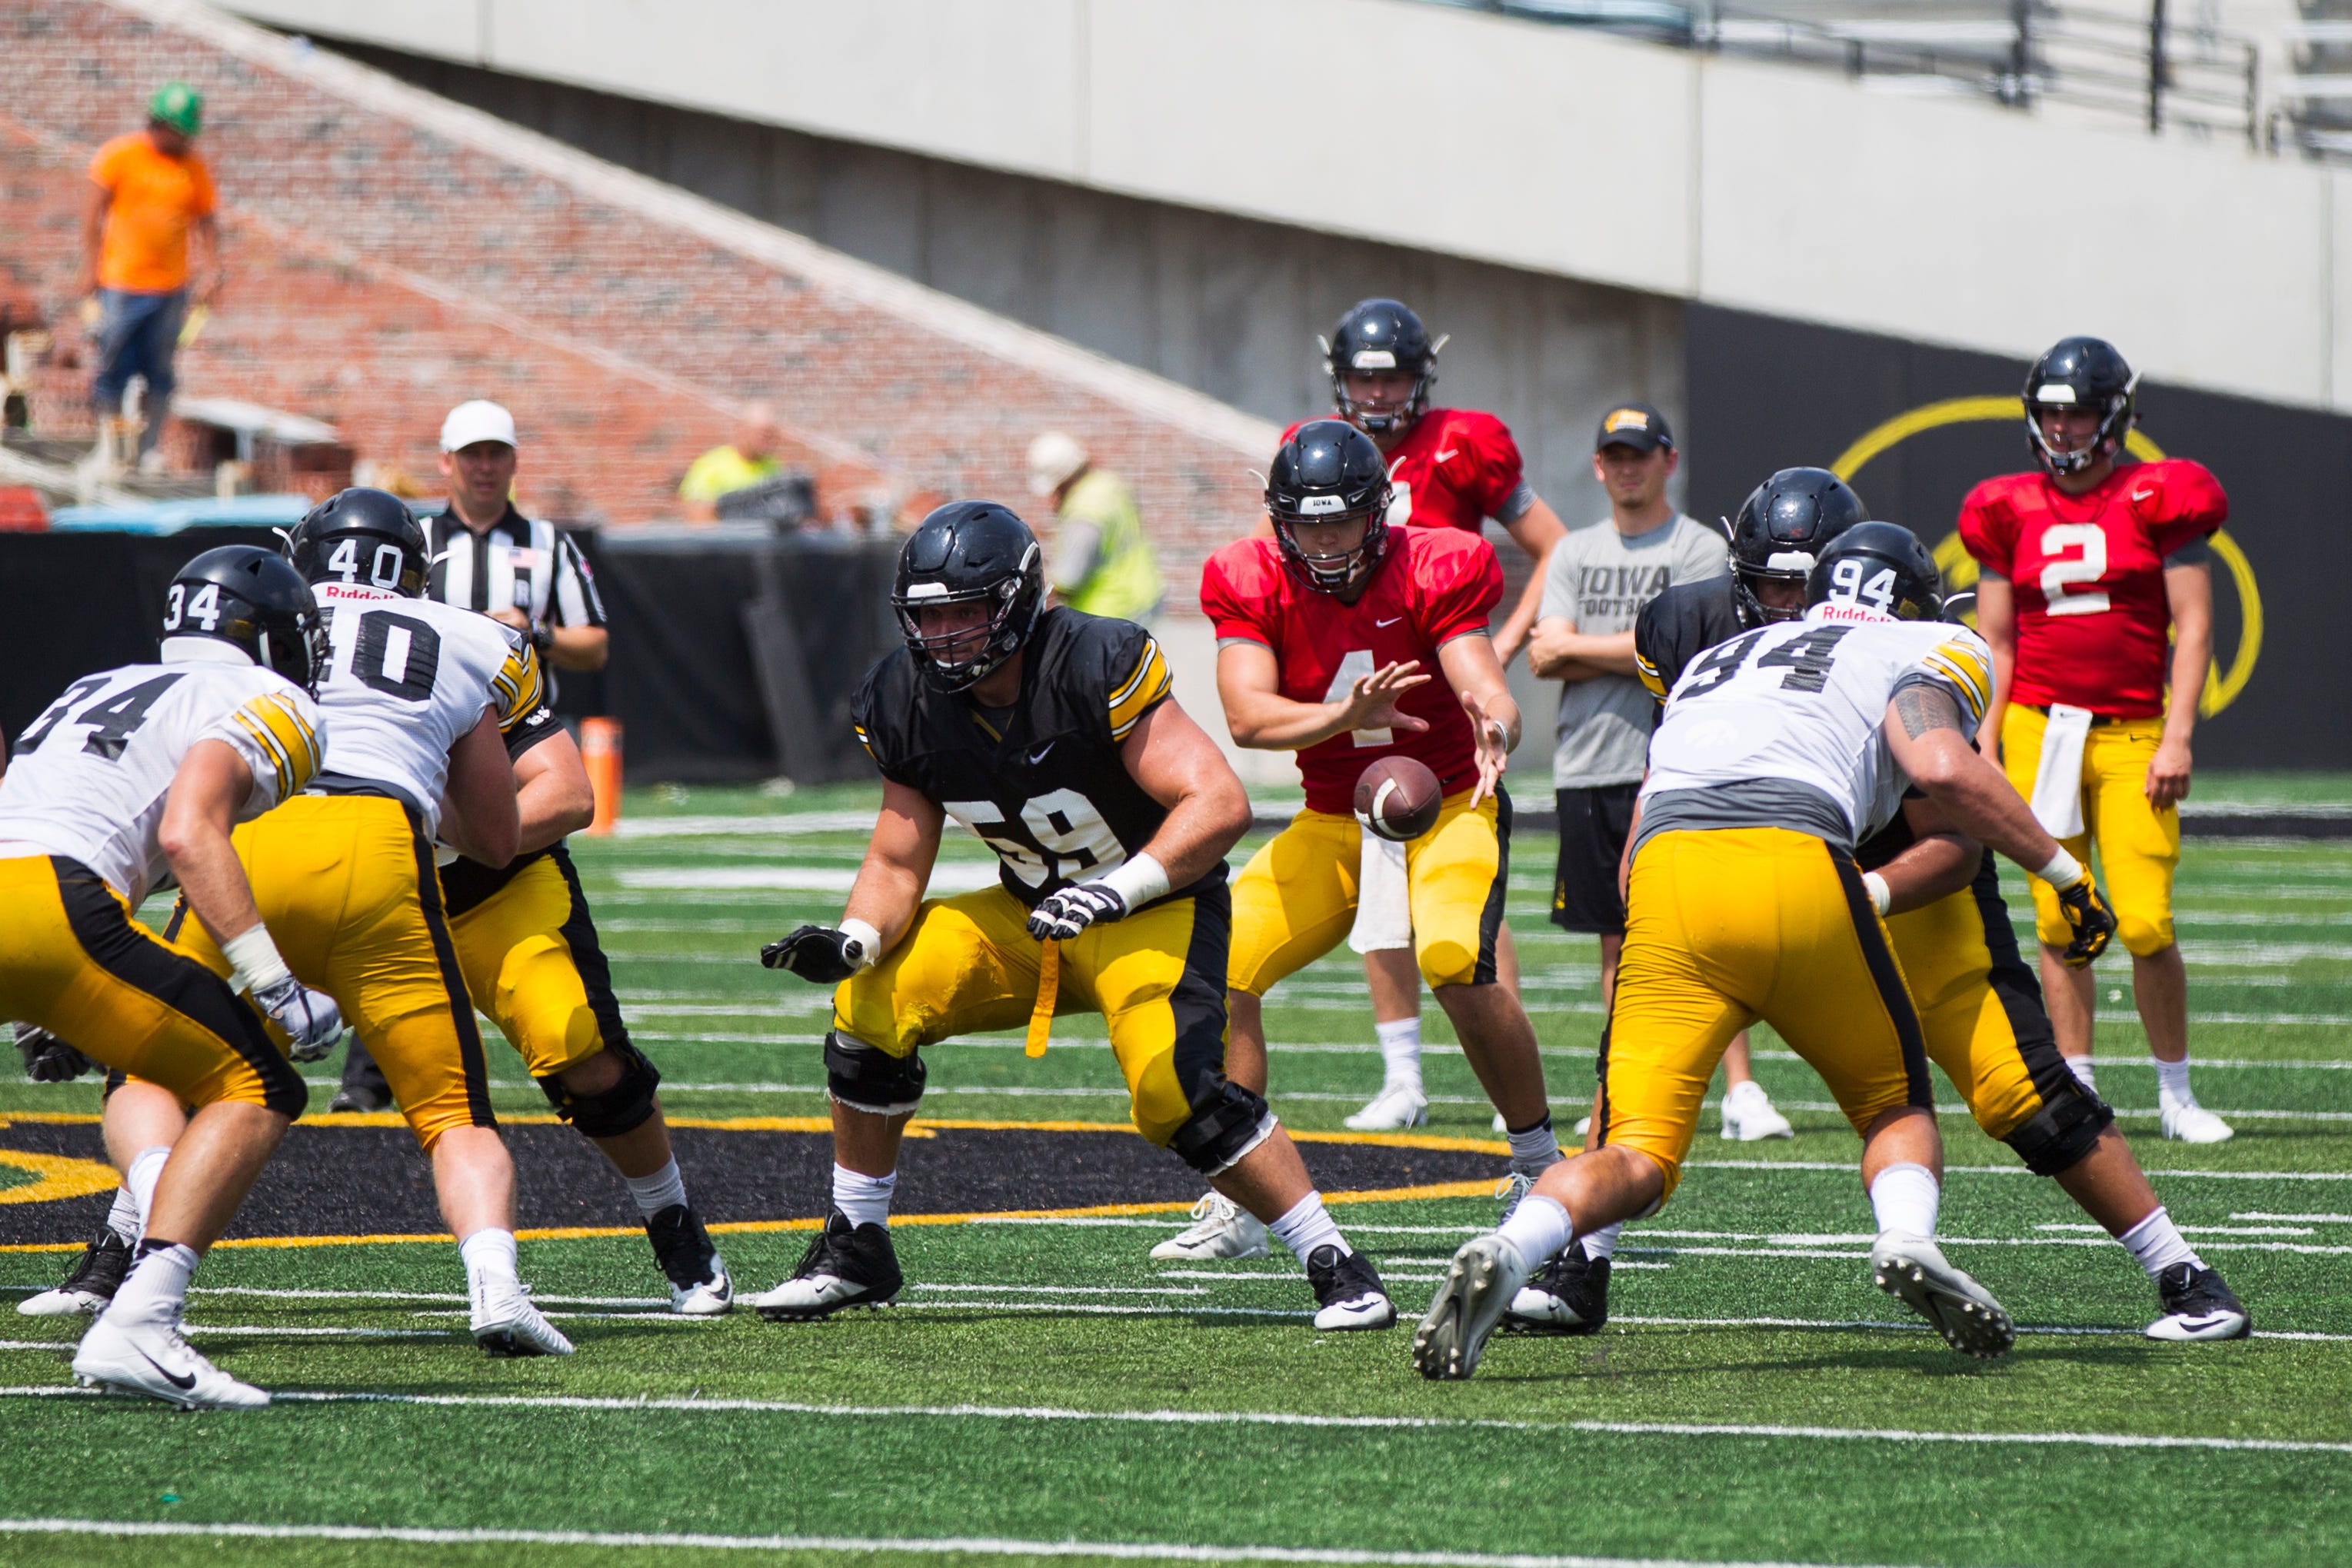 Iowa quarterback Nate Stanley catches a snap from offensive lineman Ross Reynolds during a Kids Day practice on Saturday, Aug. 11, 2018, at Kinnick Stadium in Iowa City.